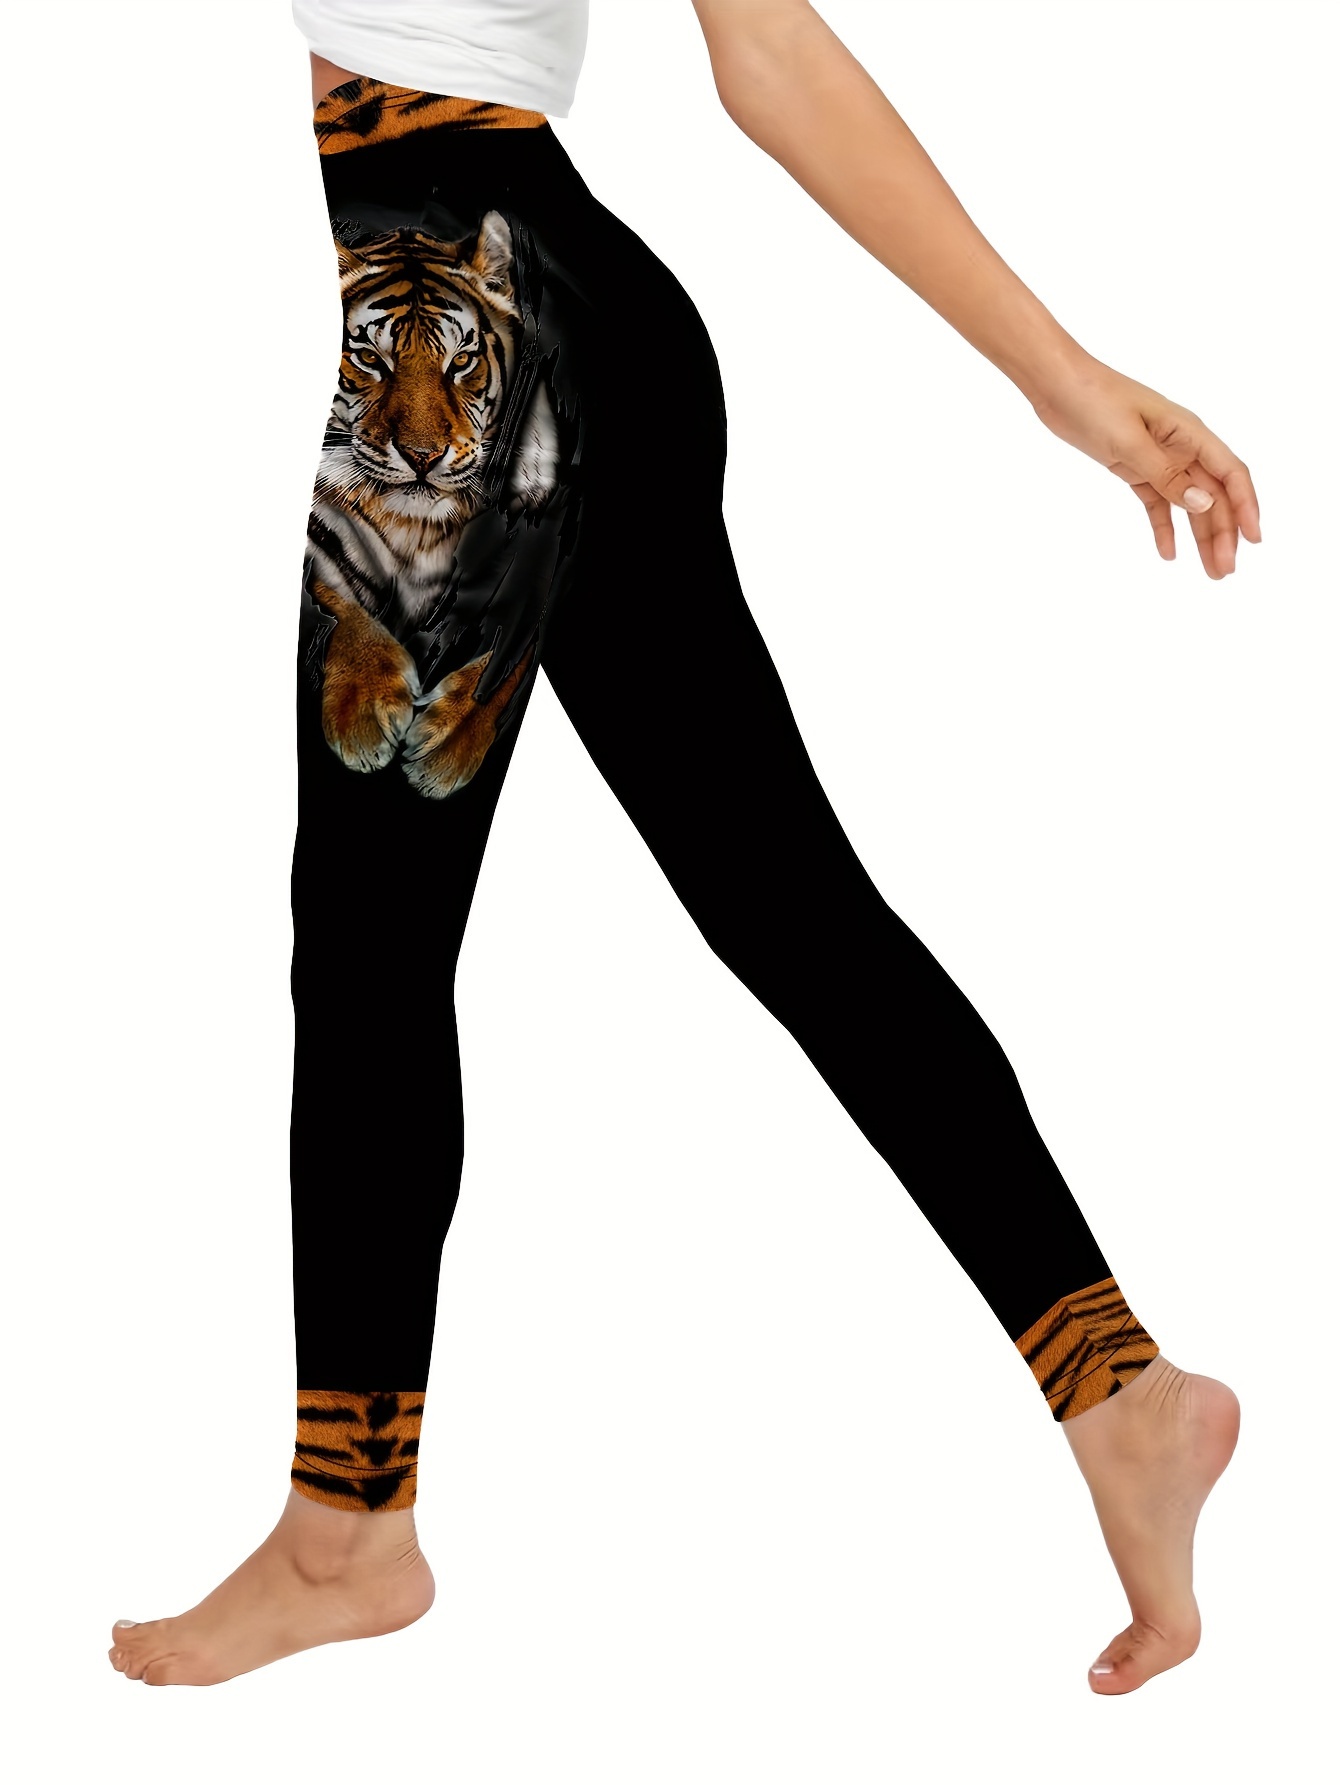 Plus Size Tiger Print Two-piece Set, Causal Sleeveless Tank Top & Leggings  Outfits For Spring & Summer, Women's Plus Size Clothing